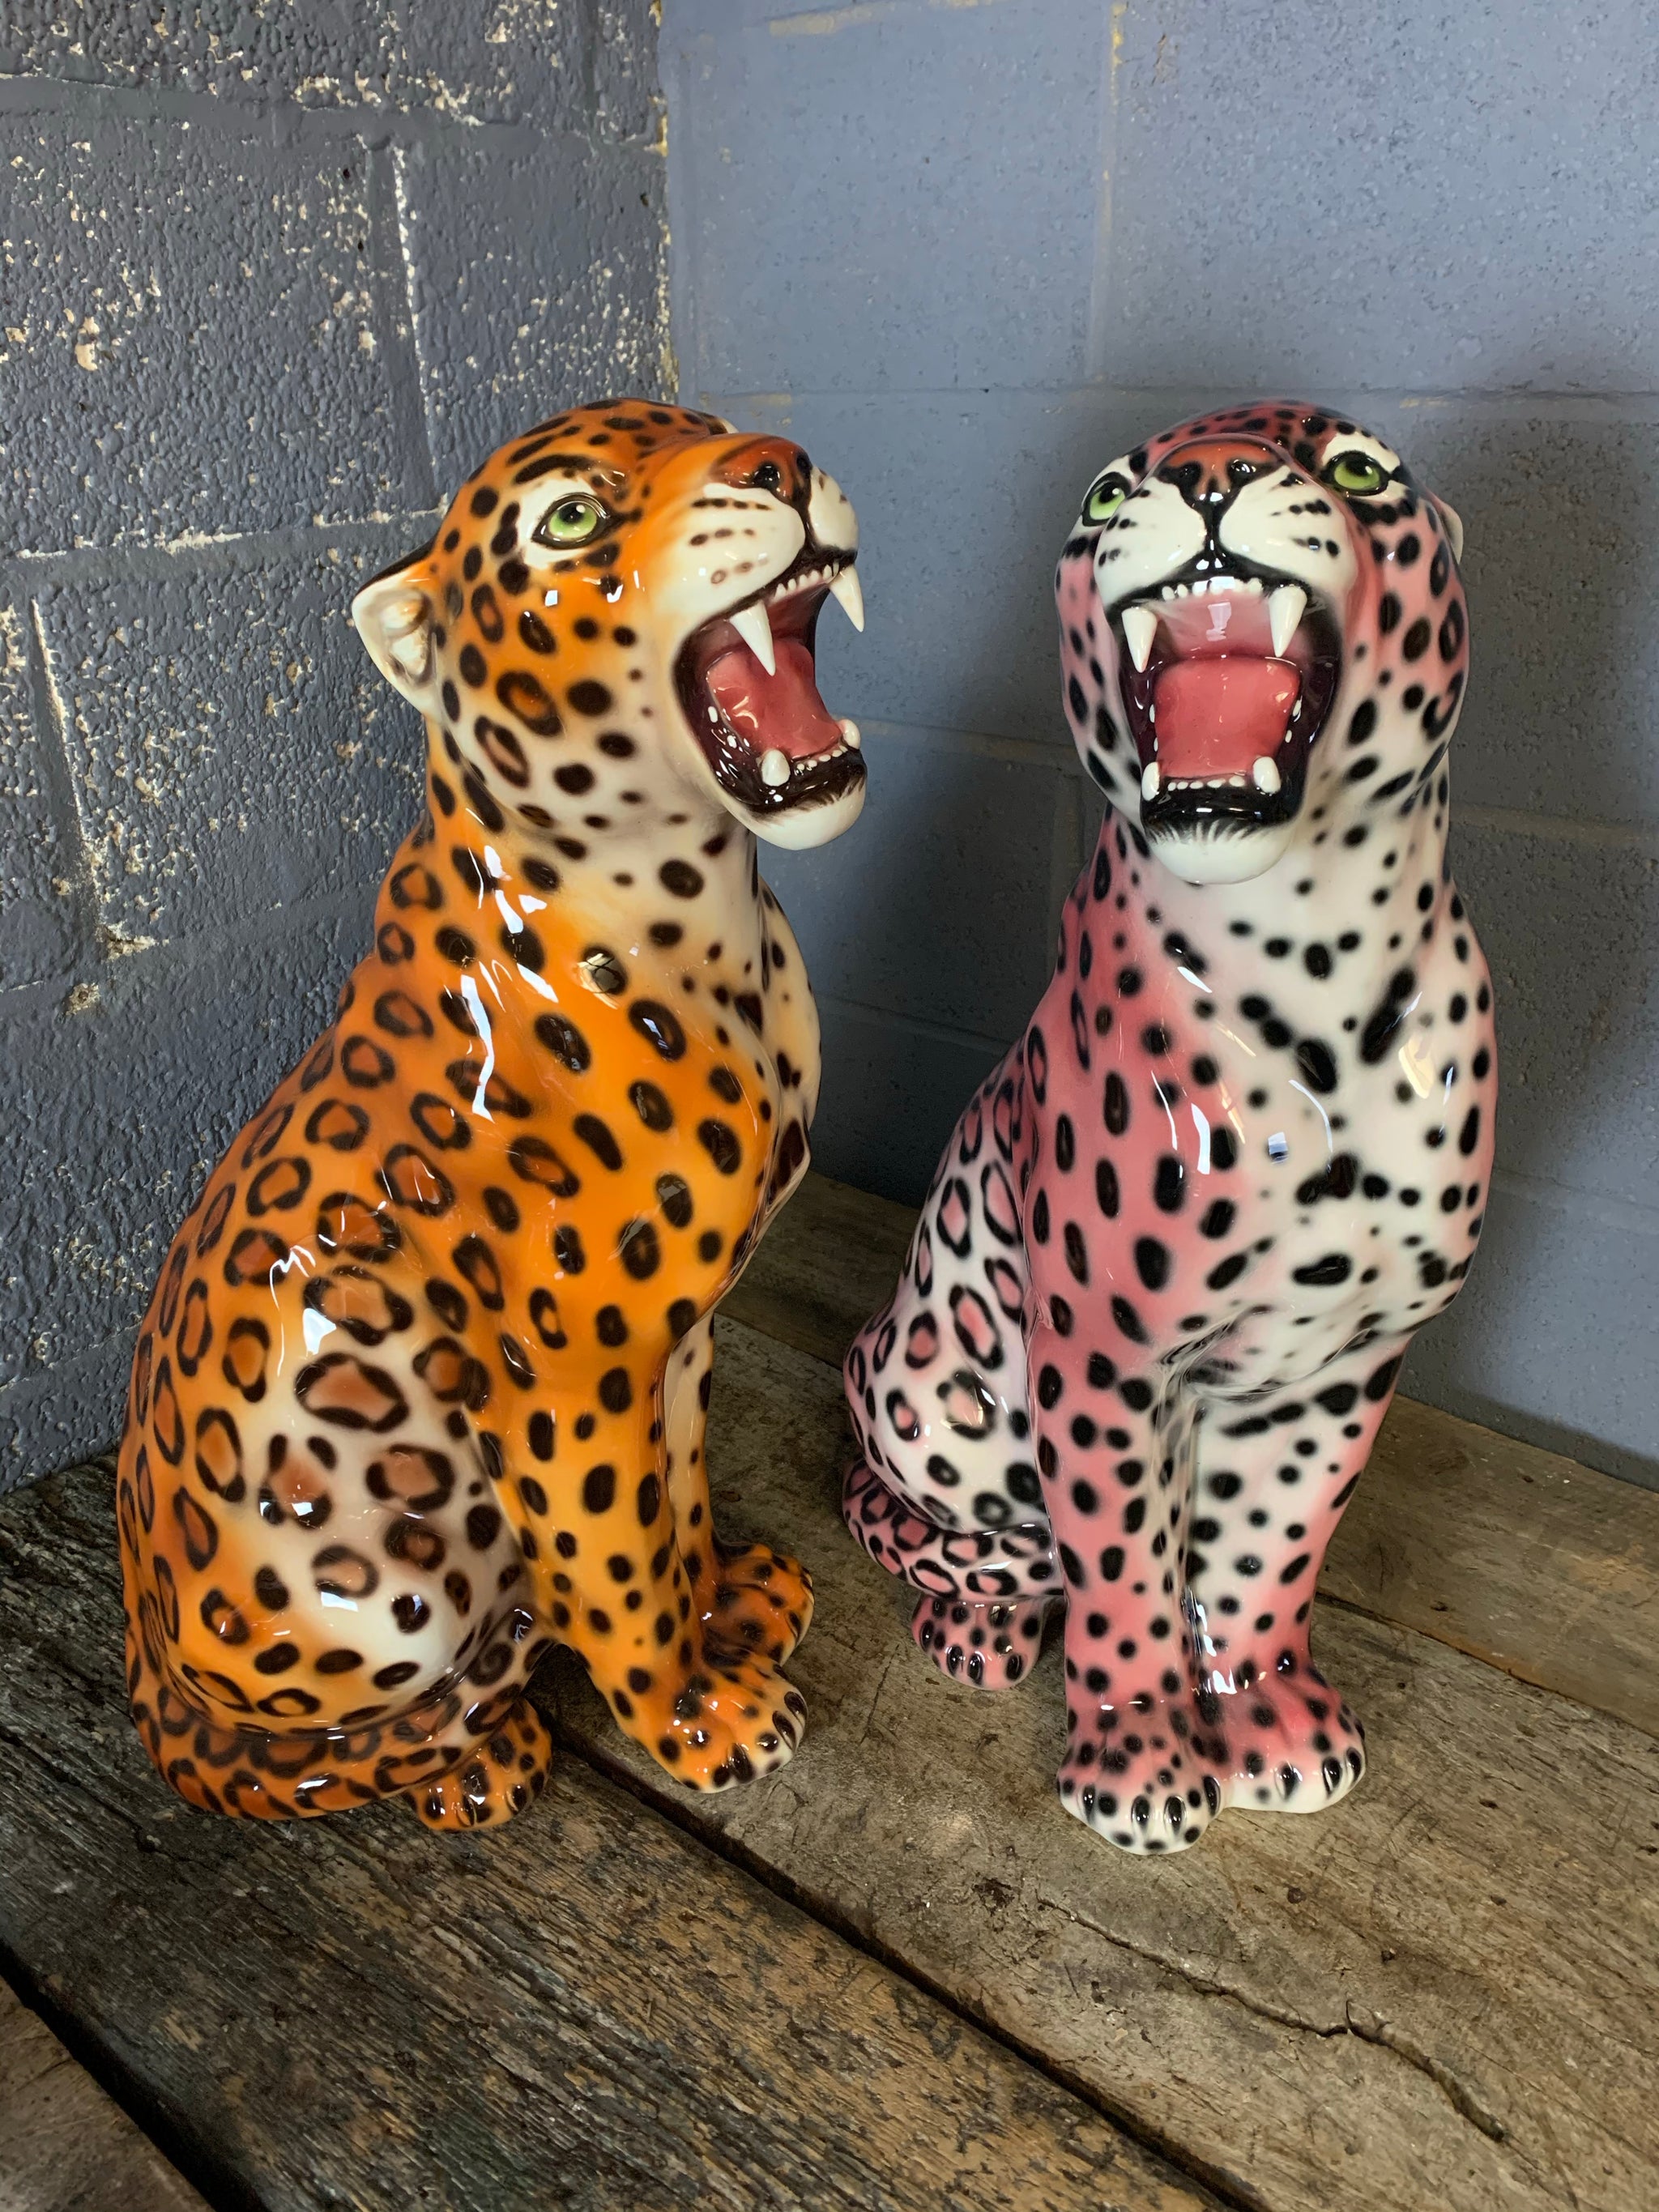 Leopard statue sitting in plaster in the style of the 50s, Made in